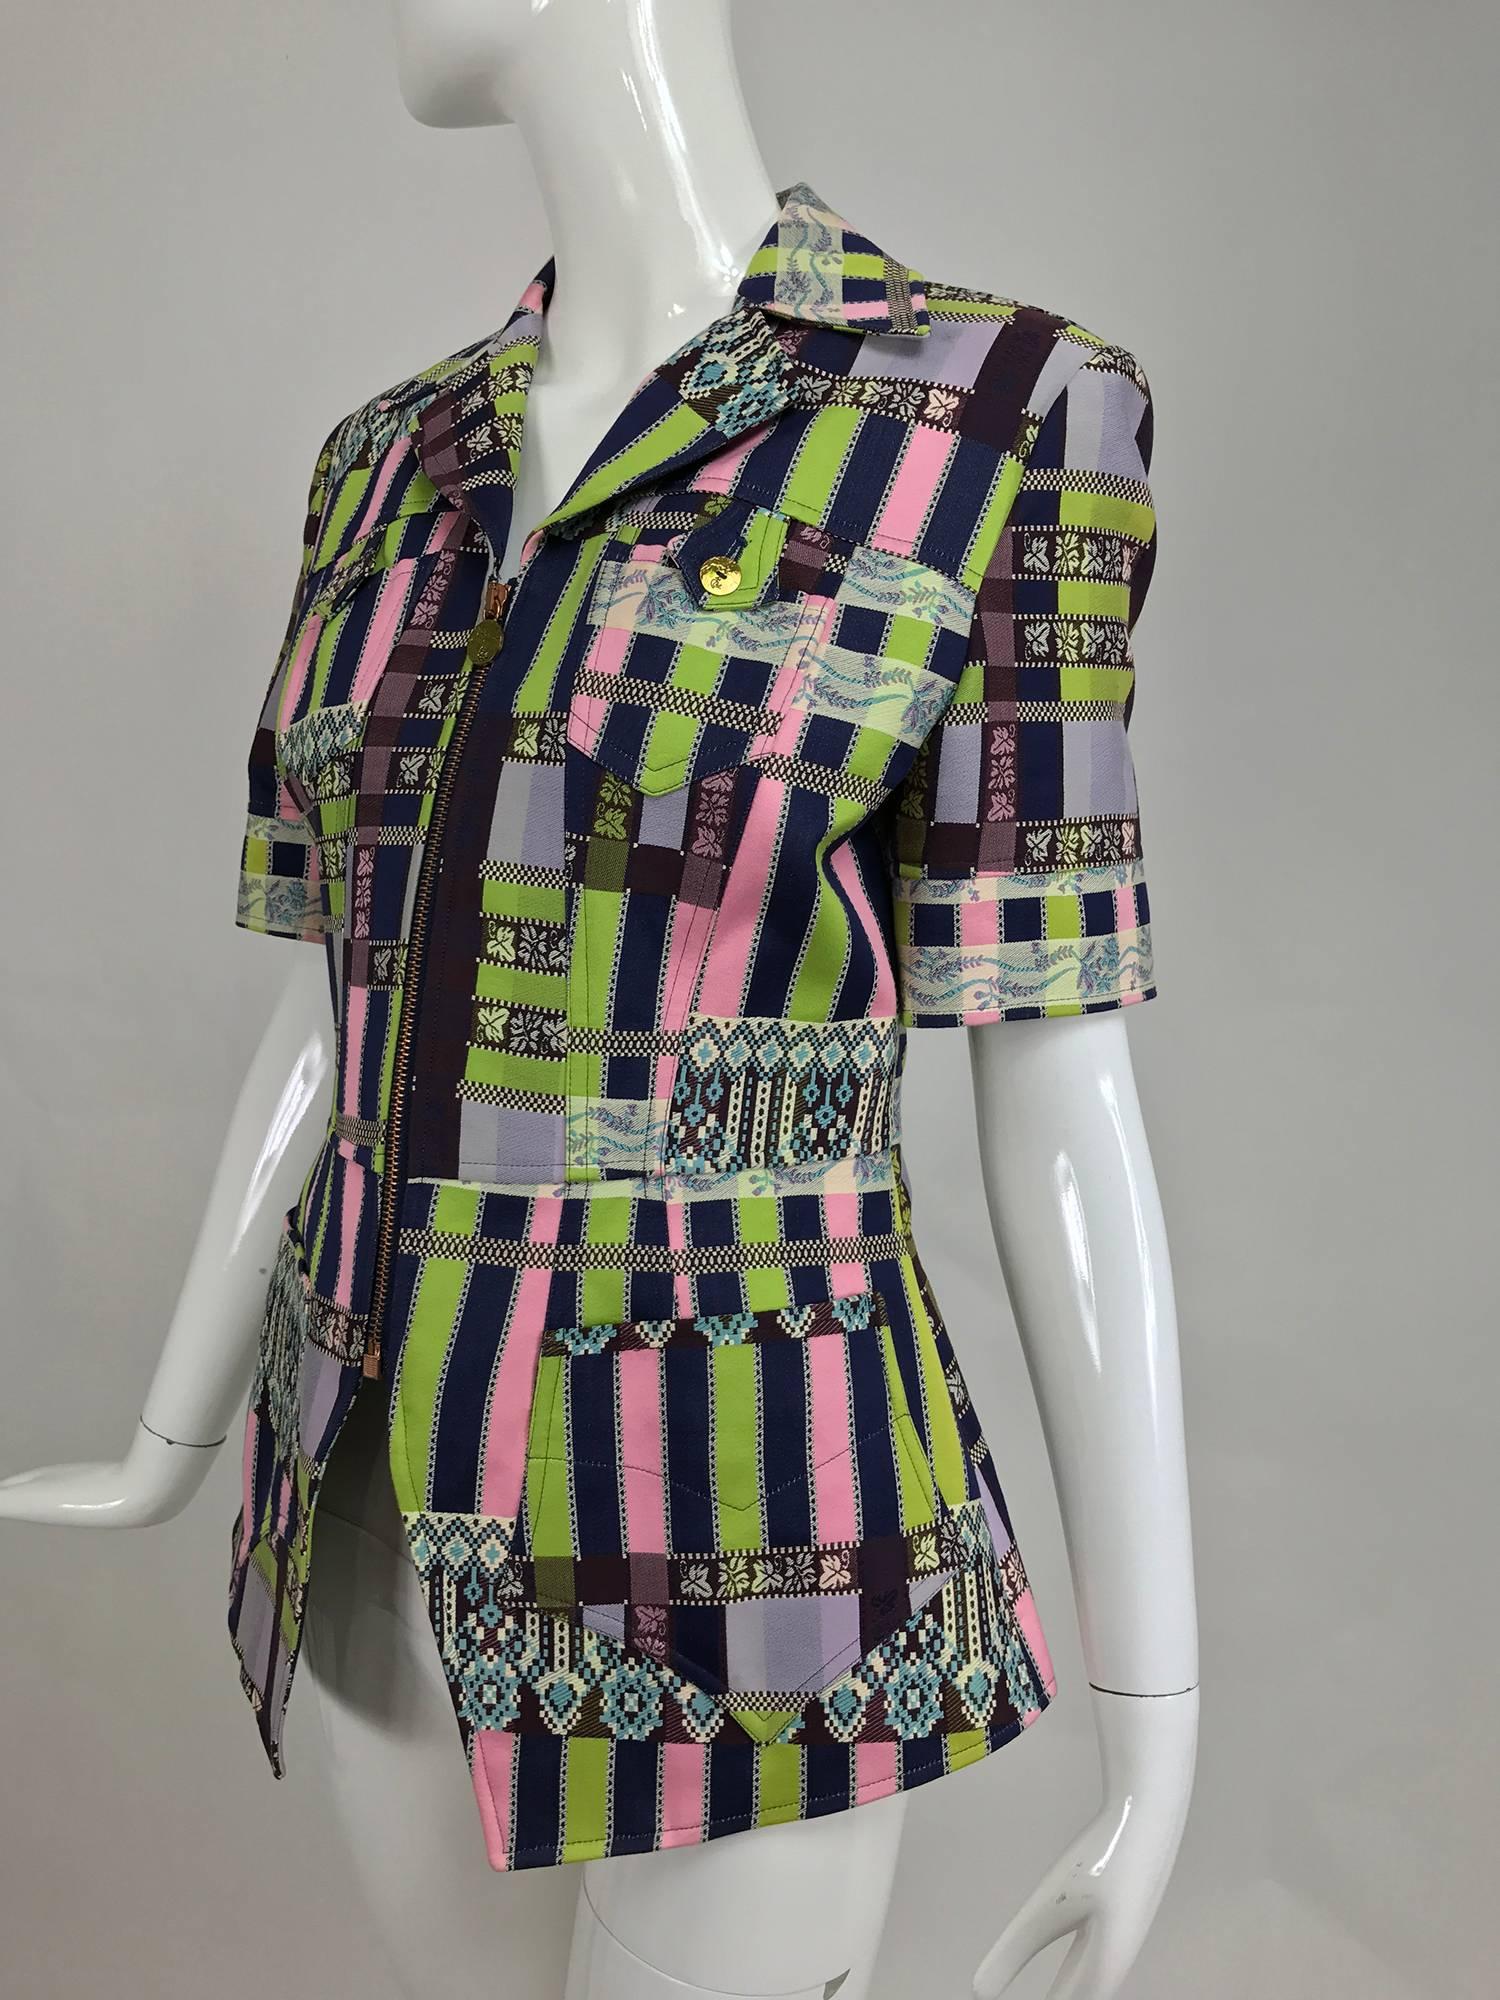 Christian LaCroix Bazar, copper metal zipper front Short sleeve jacket from 1980s...100% cotton jacket features woven patchwork fabric with notched lapels, short sleeves that can be turned back...Fitted bodice with defined waist and long line hip